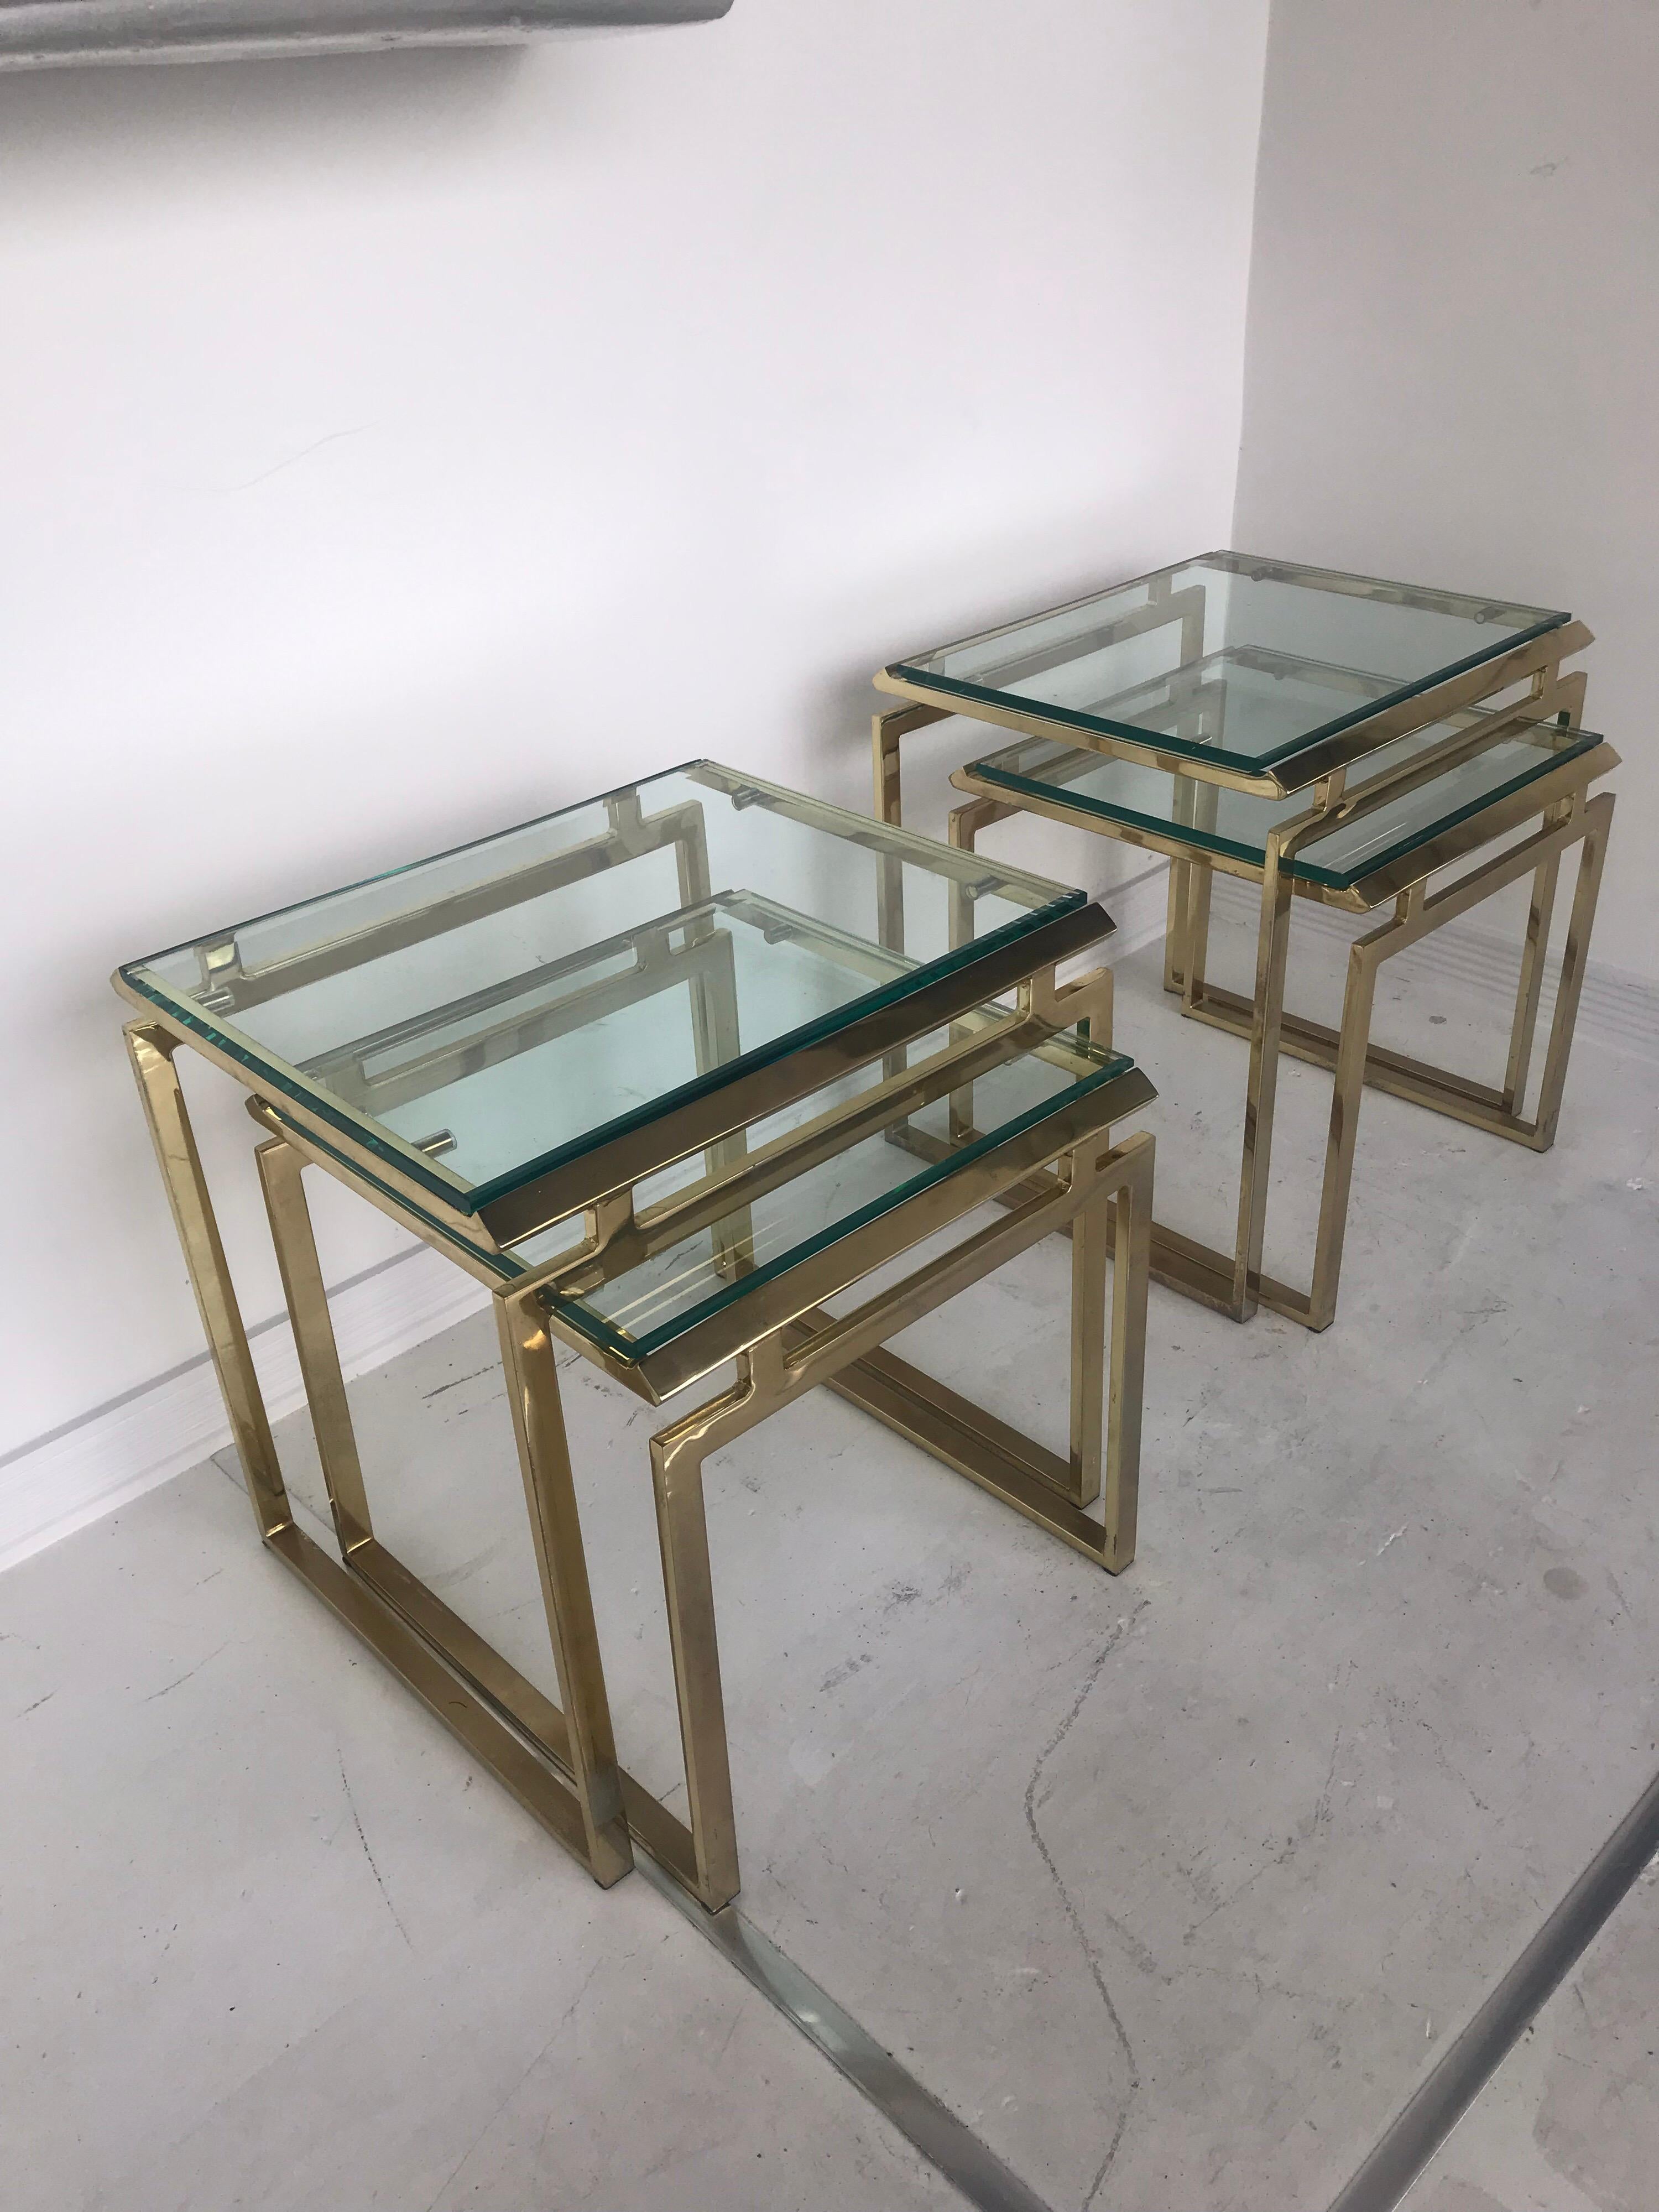 Pair of modernist nesting tables in brass with beveled glass tops. The set is two larger tables and two smaller tables which nest perfectly under the larger ones.